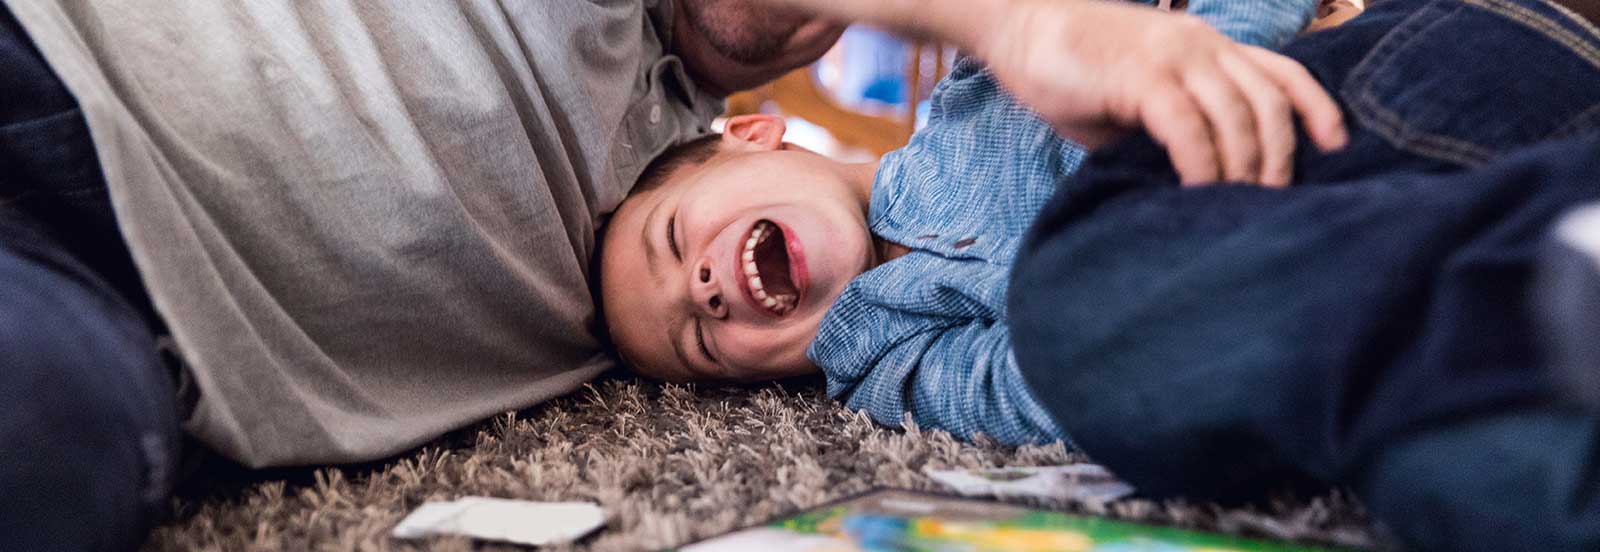 Father and son play on the floor. -767x554.jpg